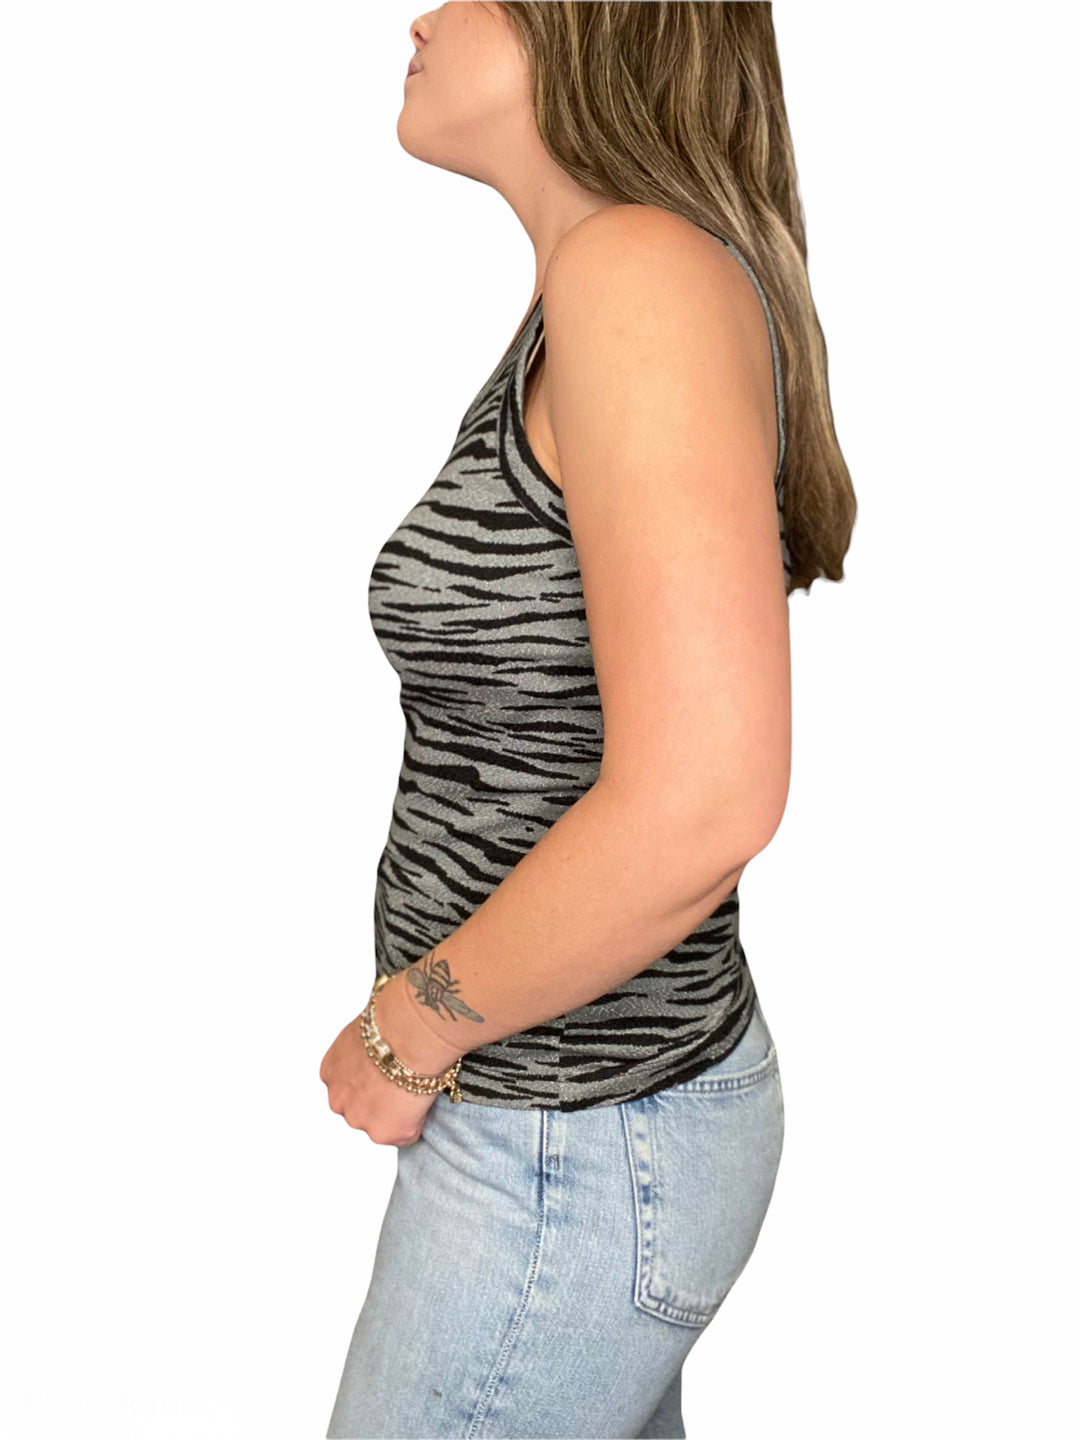 TIGER PRINT PALOMA WIDE BINDING TANK - Kingfisher Road - Online Boutique